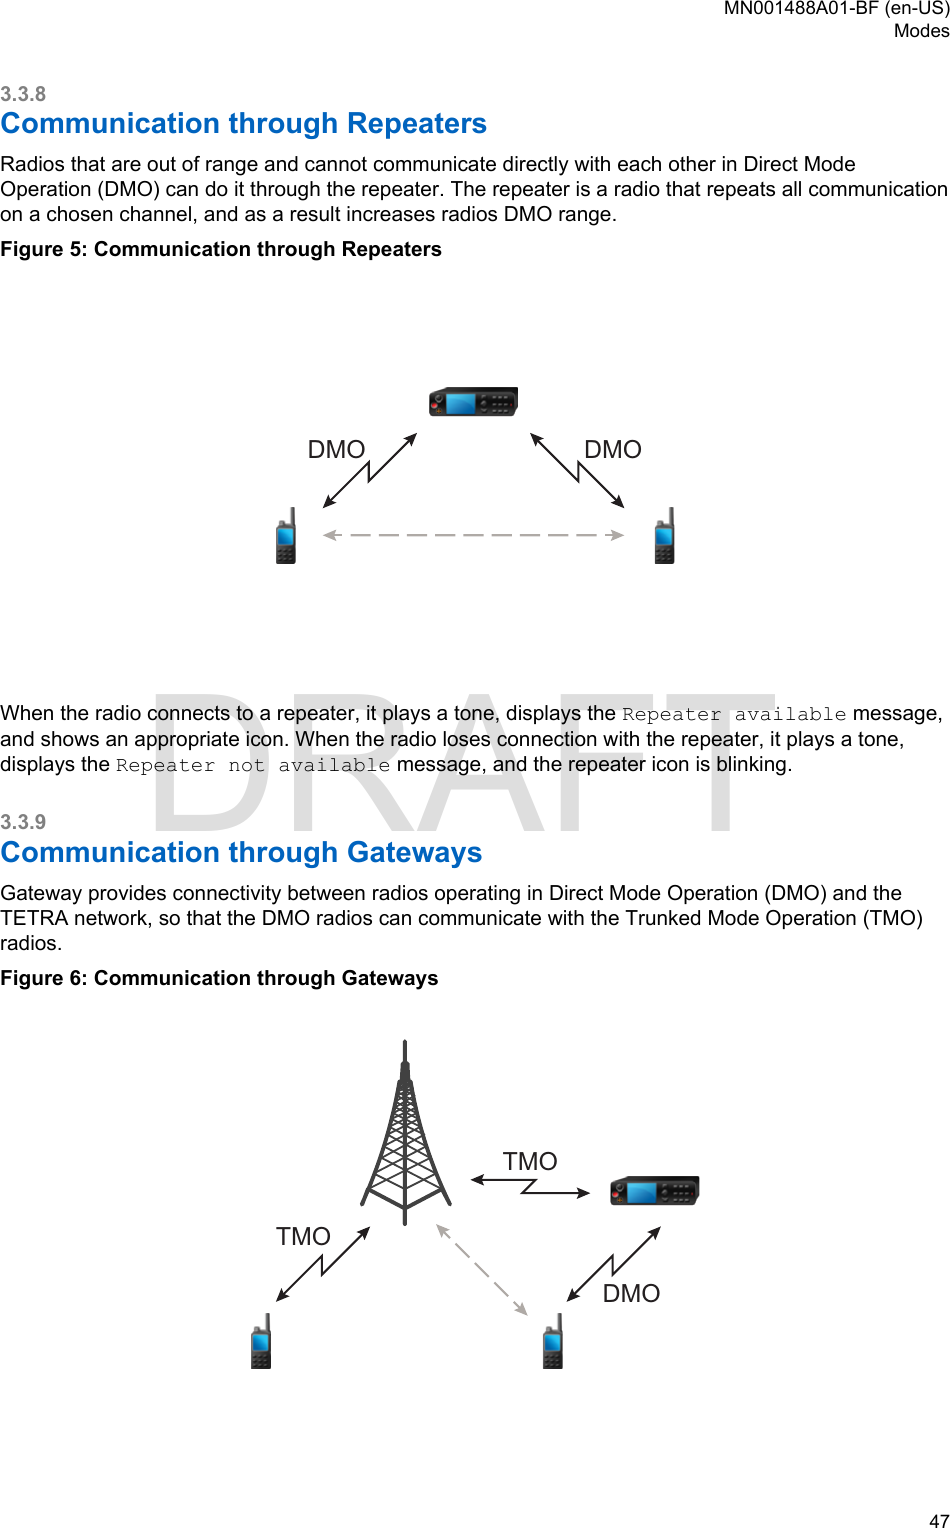 3.3.8Communication through RepeatersRadios that are out of range and cannot communicate directly with each other in Direct ModeOperation (DMO) can do it through the repeater. The repeater is a radio that repeats all communicationon a chosen channel, and as a result increases radios DMO range.Figure 5: Communication through RepeatersDMODMOWhen the radio connects to a repeater, it plays a tone, displays the Repeater available message,and shows an appropriate icon. When the radio loses connection with the repeater, it plays a tone,displays the Repeater not available message, and the repeater icon is blinking.3.3.9Communication through GatewaysGateway provides connectivity between radios operating in Direct Mode Operation (DMO) and theTETRA network, so that the DMO radios can communicate with the Trunked Mode Operation (TMO)radios.Figure 6: Communication through GatewaysDMOTMOTMOMN001488A01-BF (en-US)Modes  47DRAFT